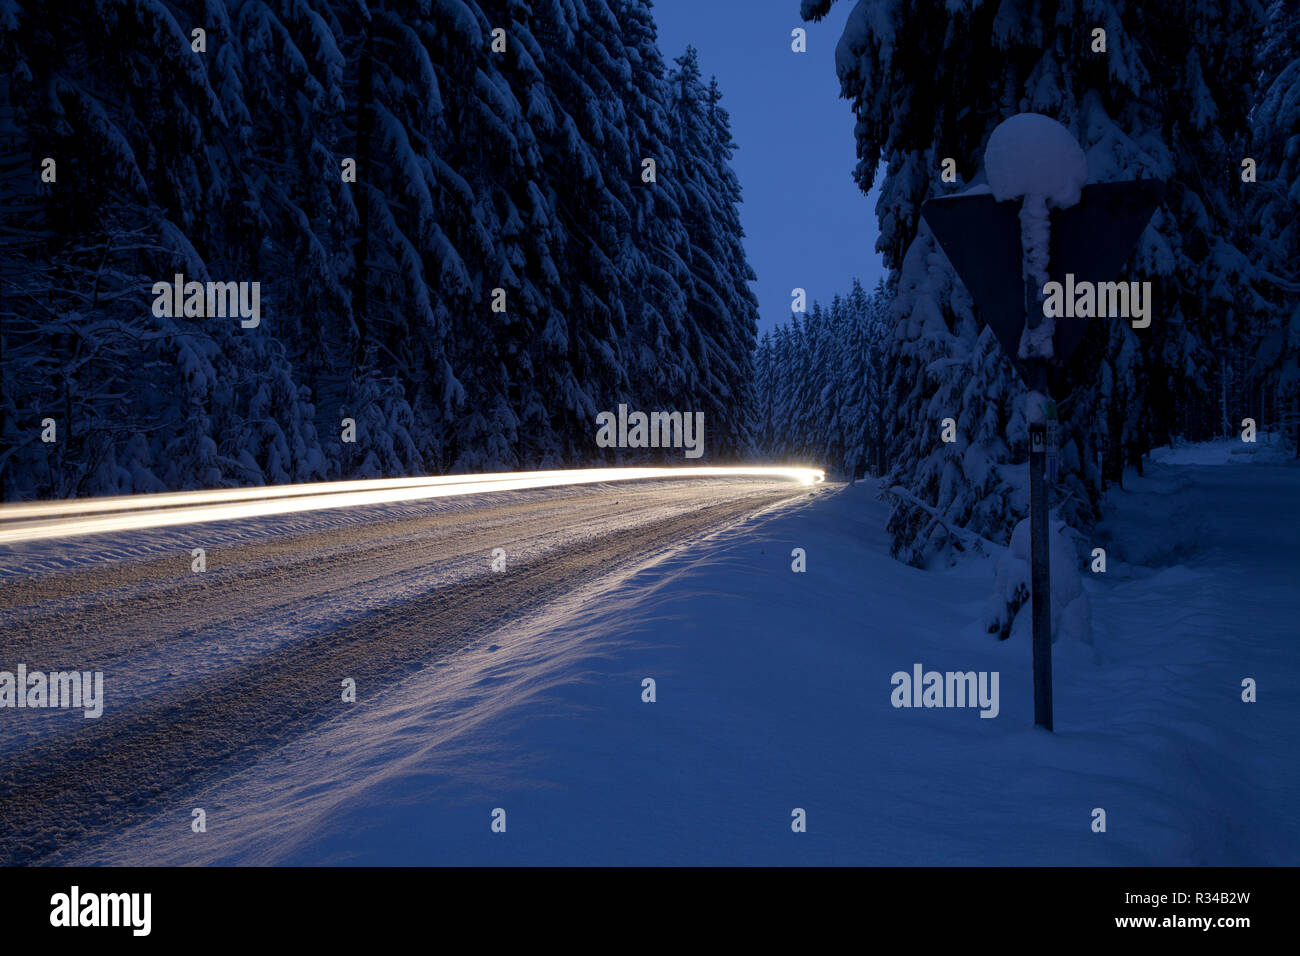 traffic in ice and snow at night Stock Photo